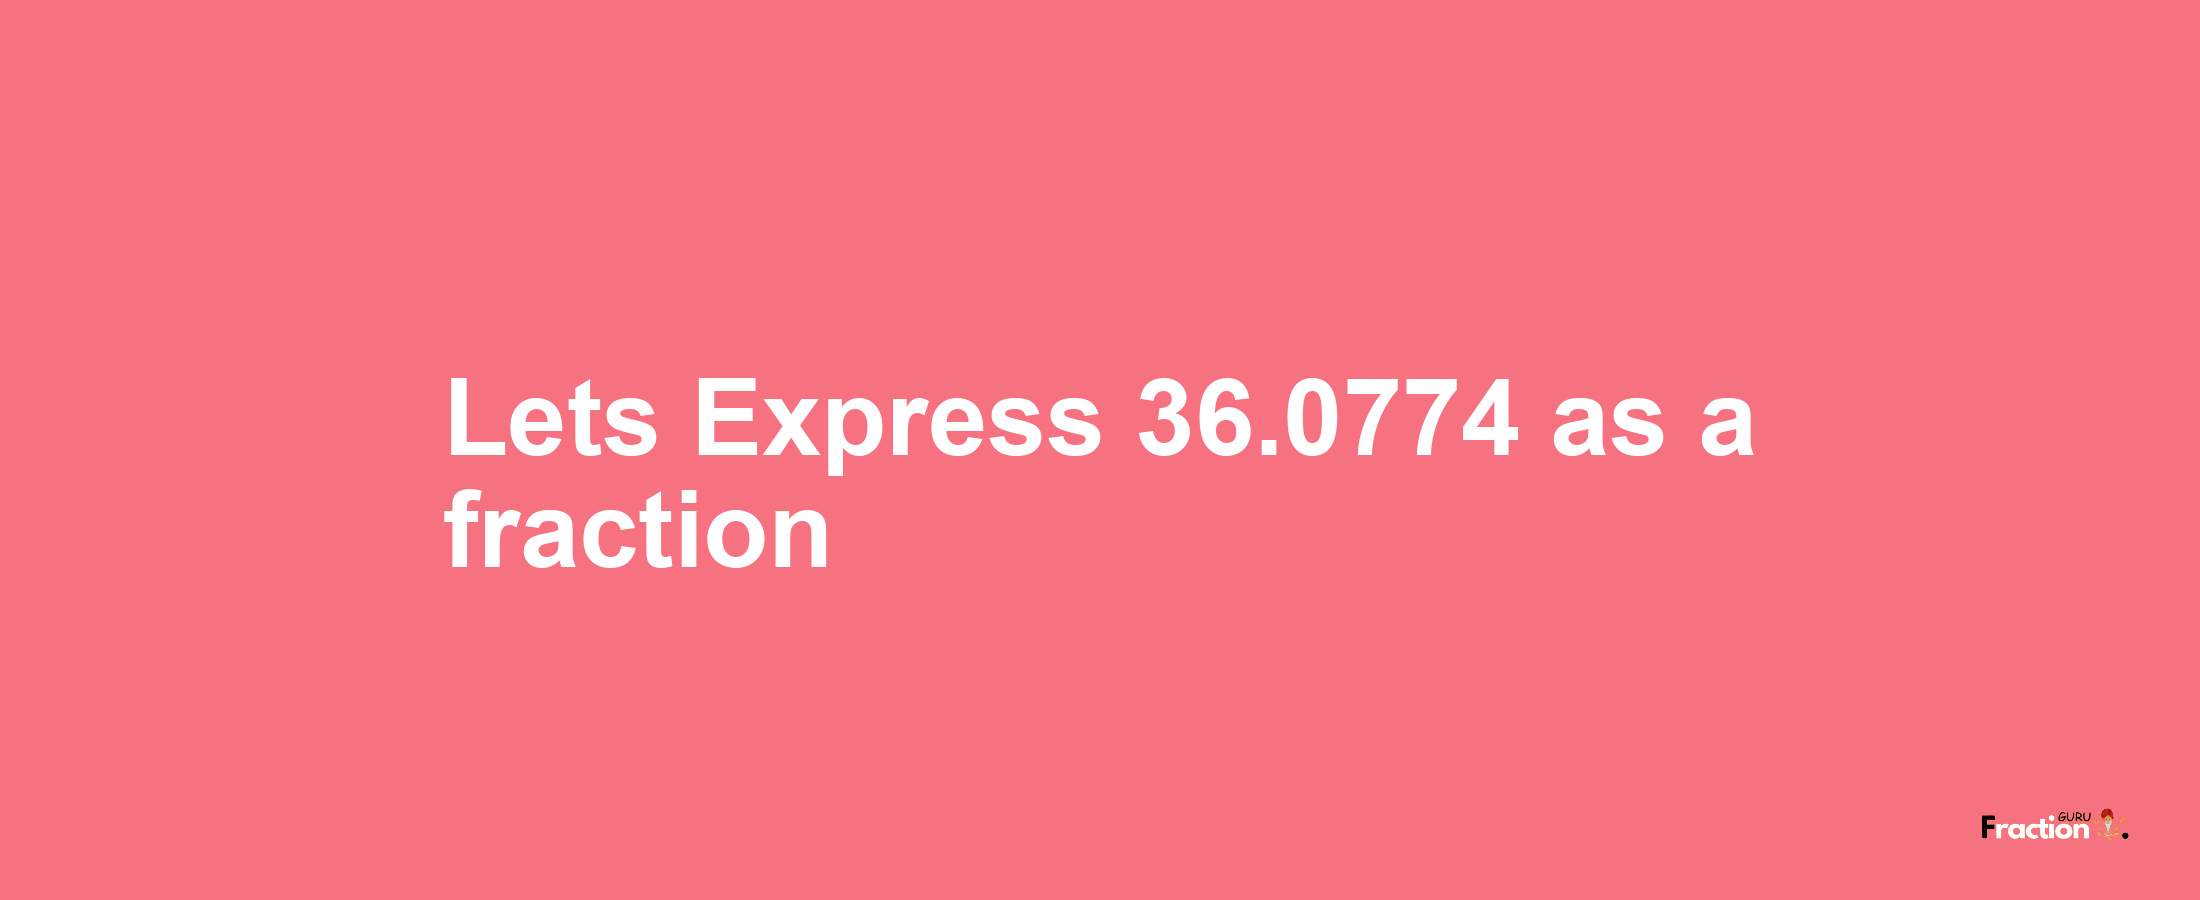 Lets Express 36.0774 as afraction